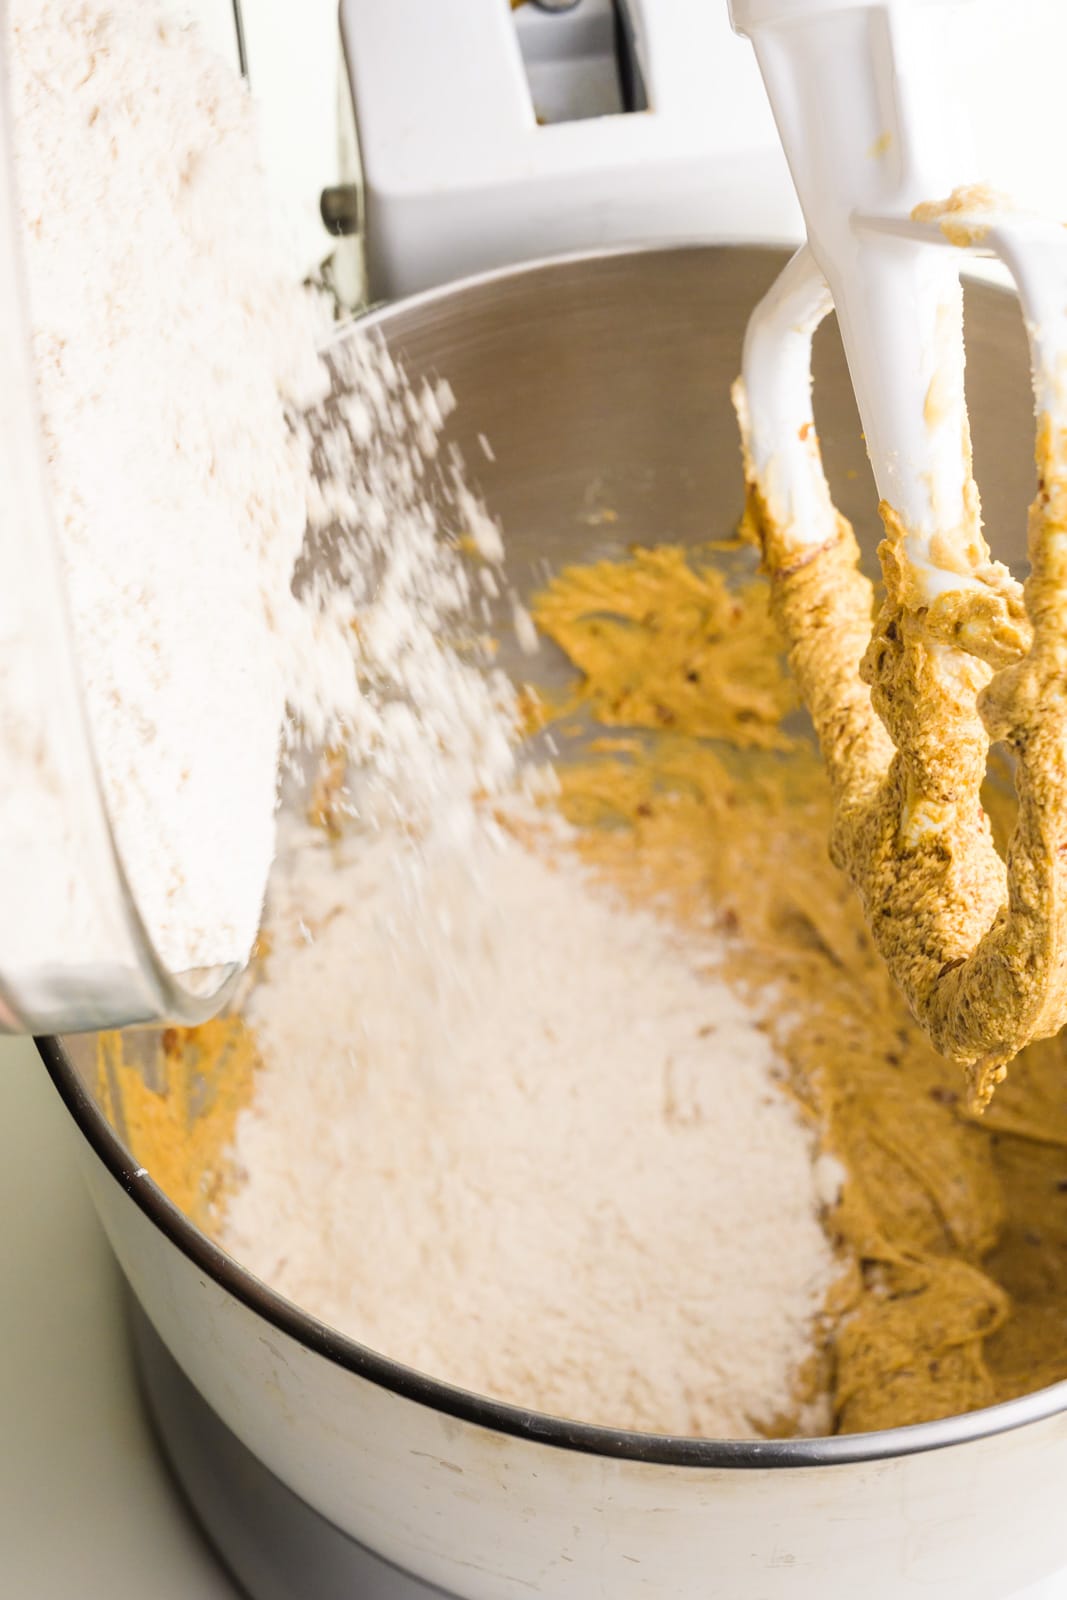 Dough is poured into a mixing bowl with cookie dough.